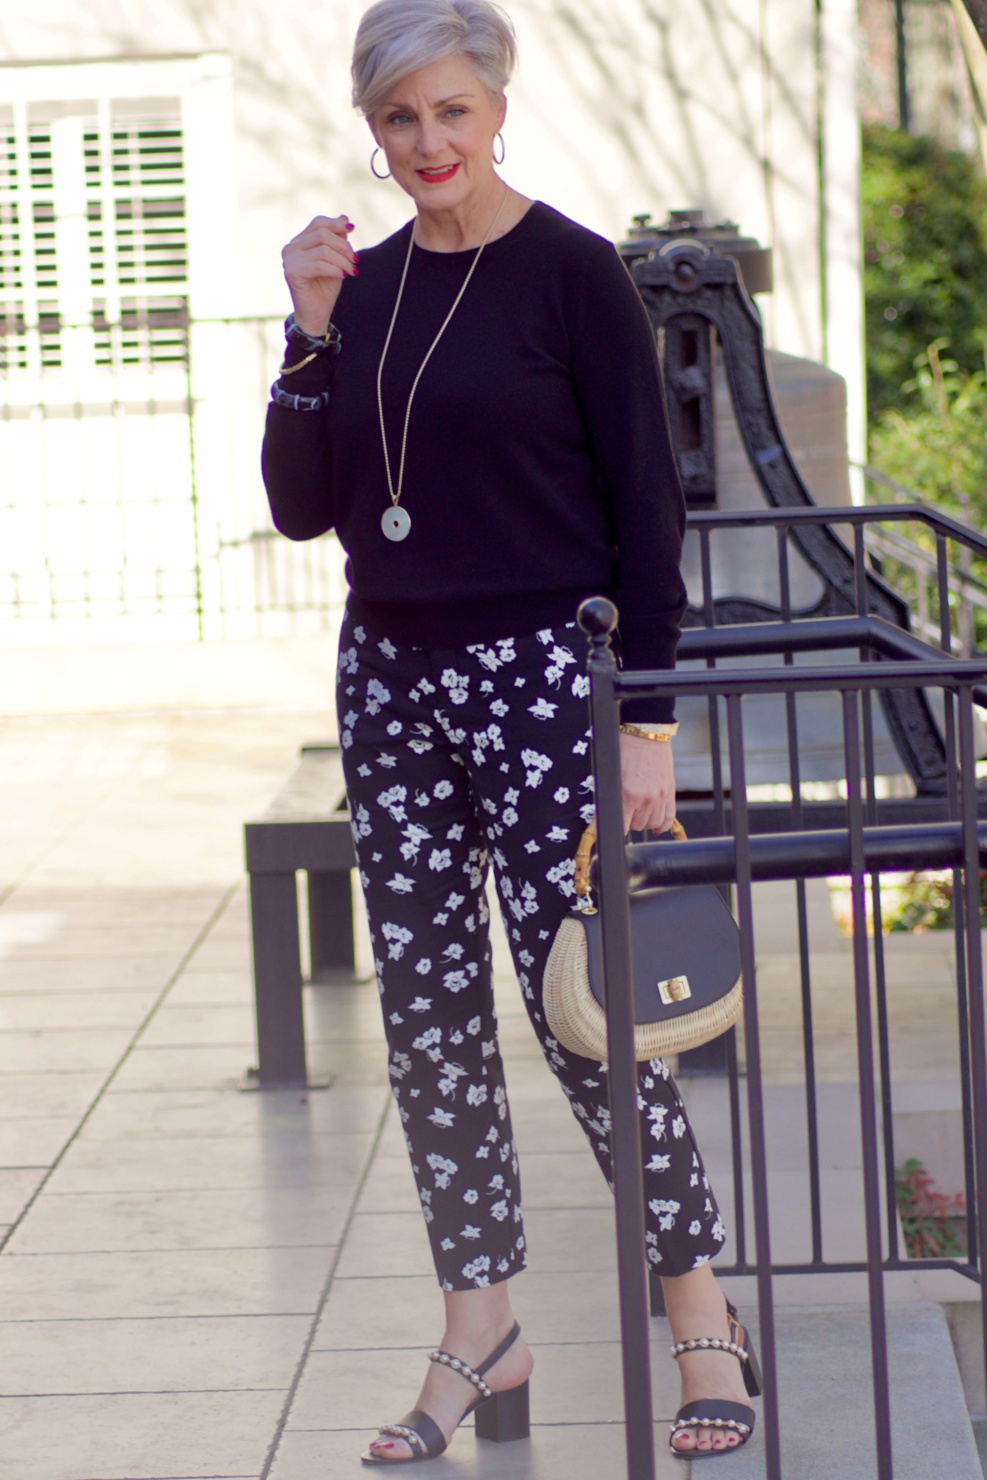 beth from Style at a Certain Age wears black and white floral ankle pants, black crewneck sweater, black pearl embellished sandals, and straw handbag